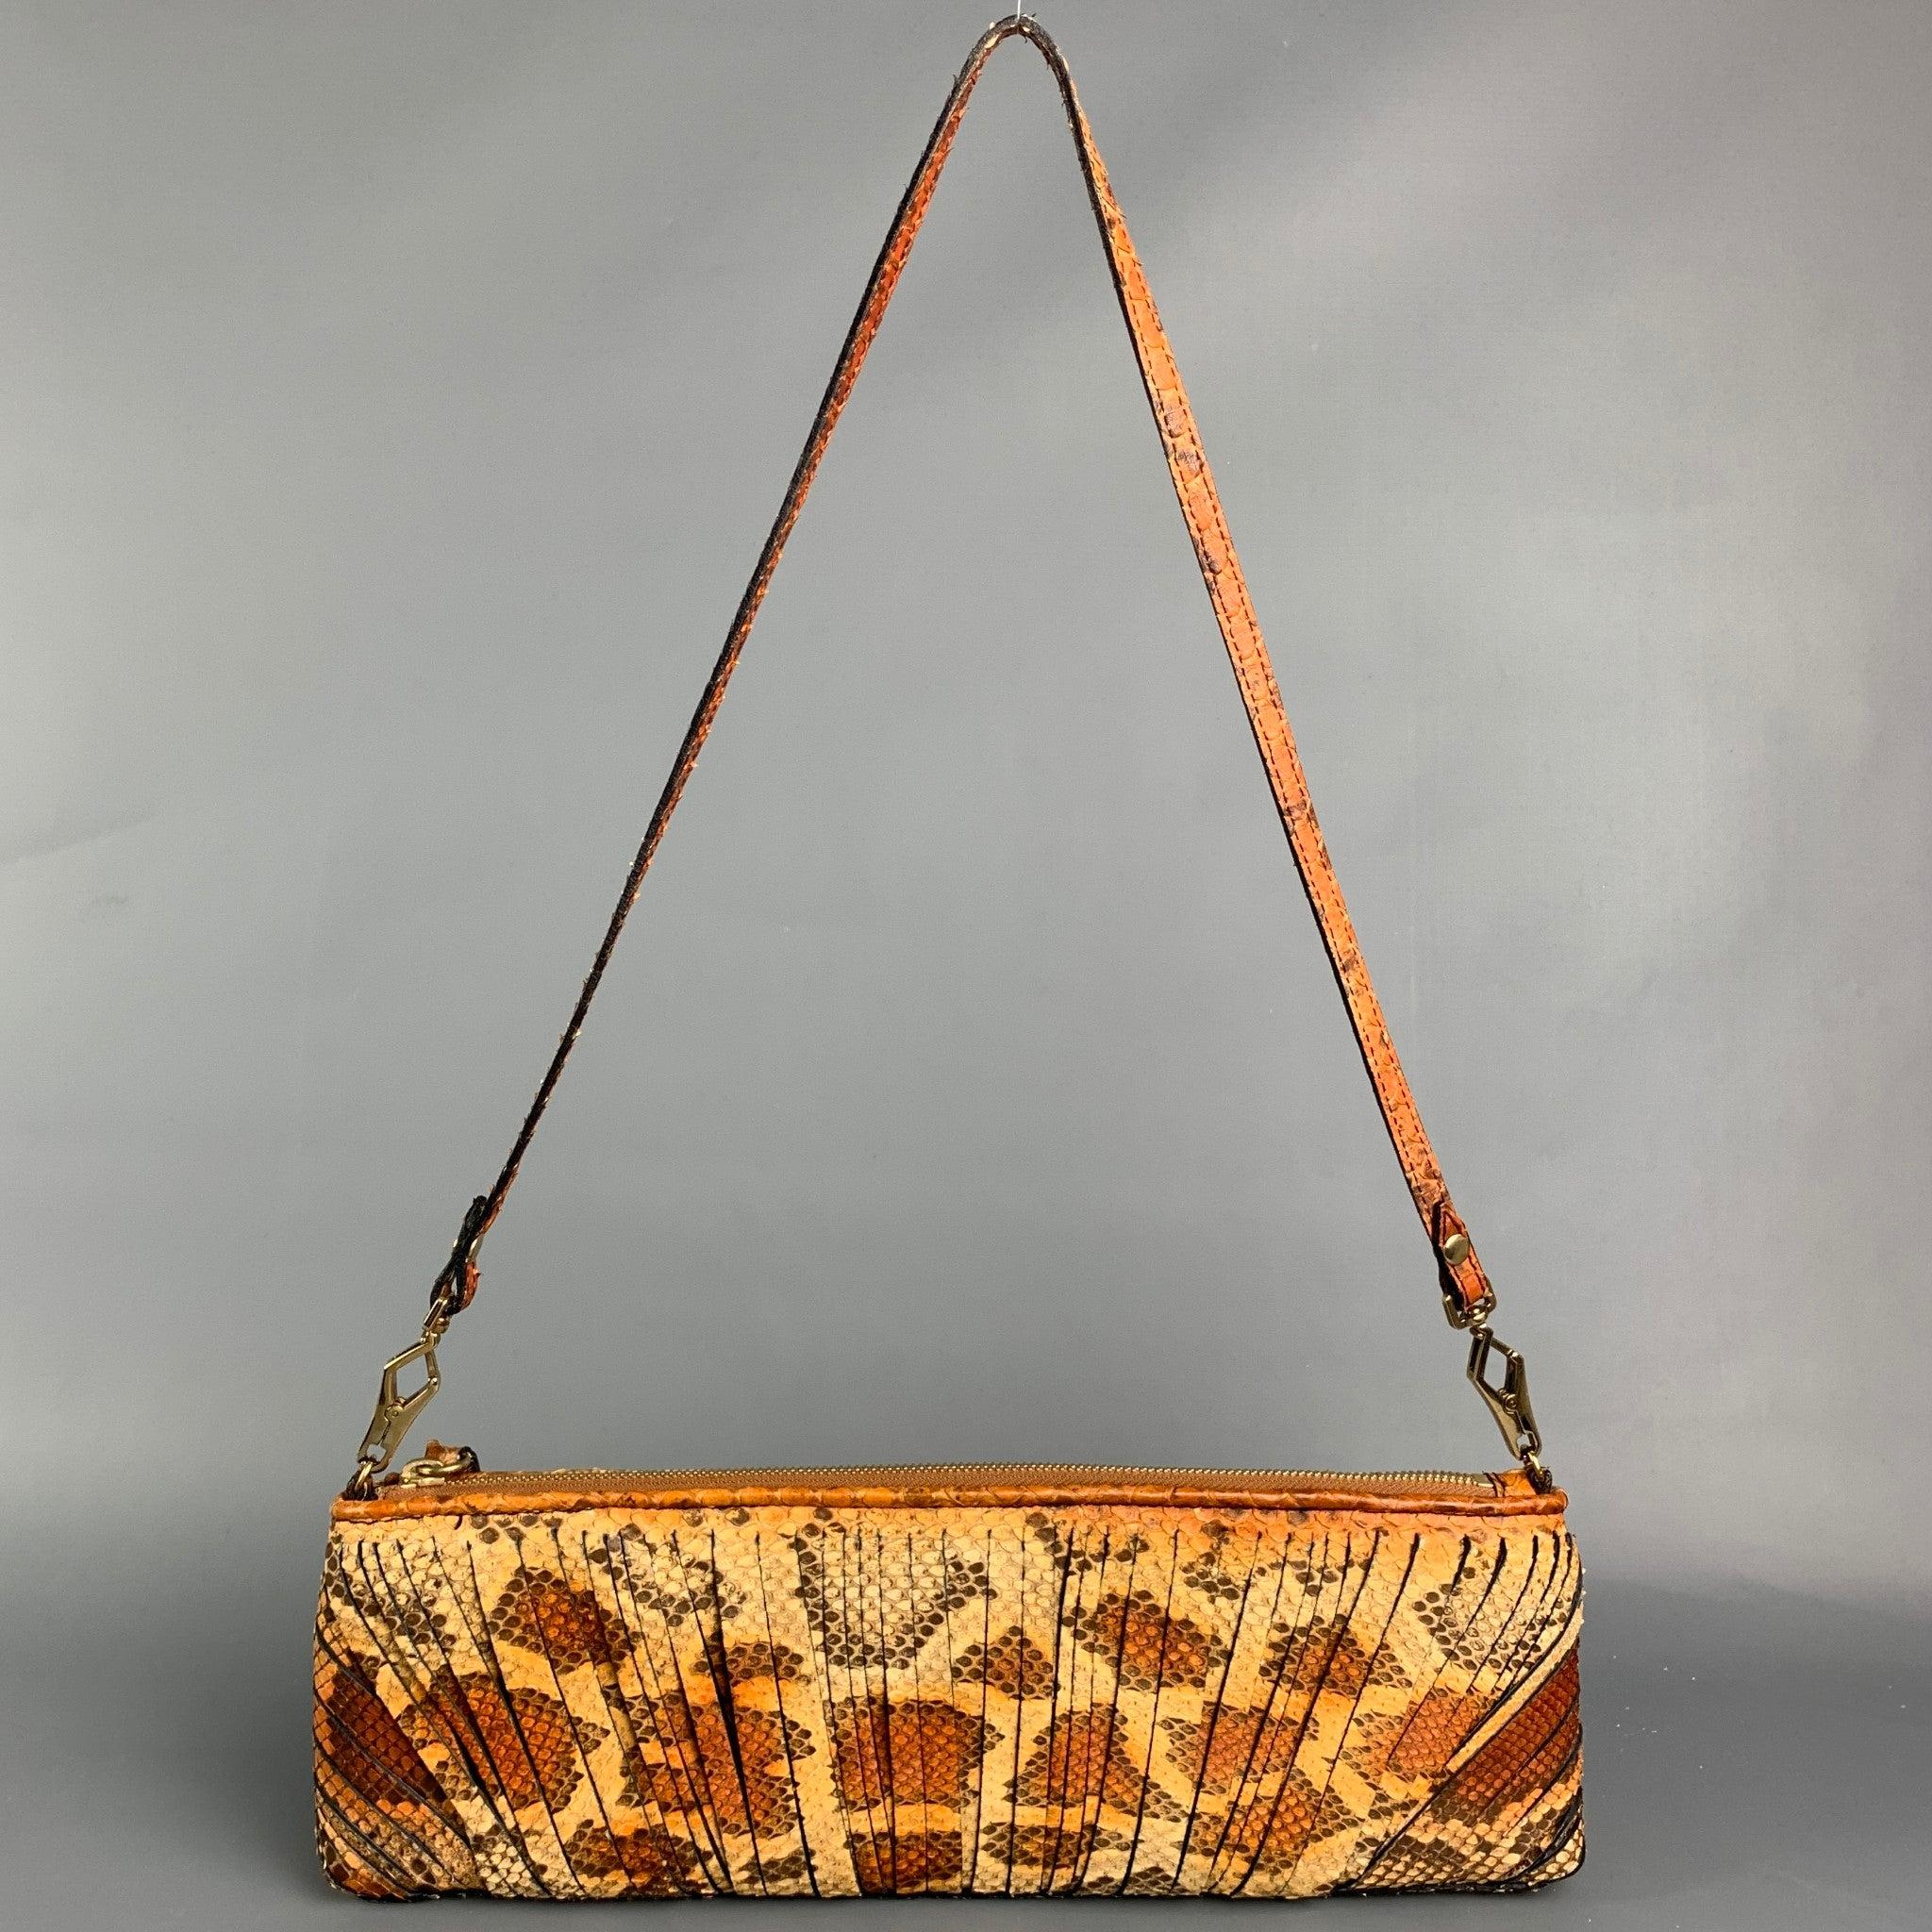 BURBERRY PRORSUM Brown & Tan Python Skin Leather Clutch Shoulder Bag In Good Condition For Sale In San Francisco, CA